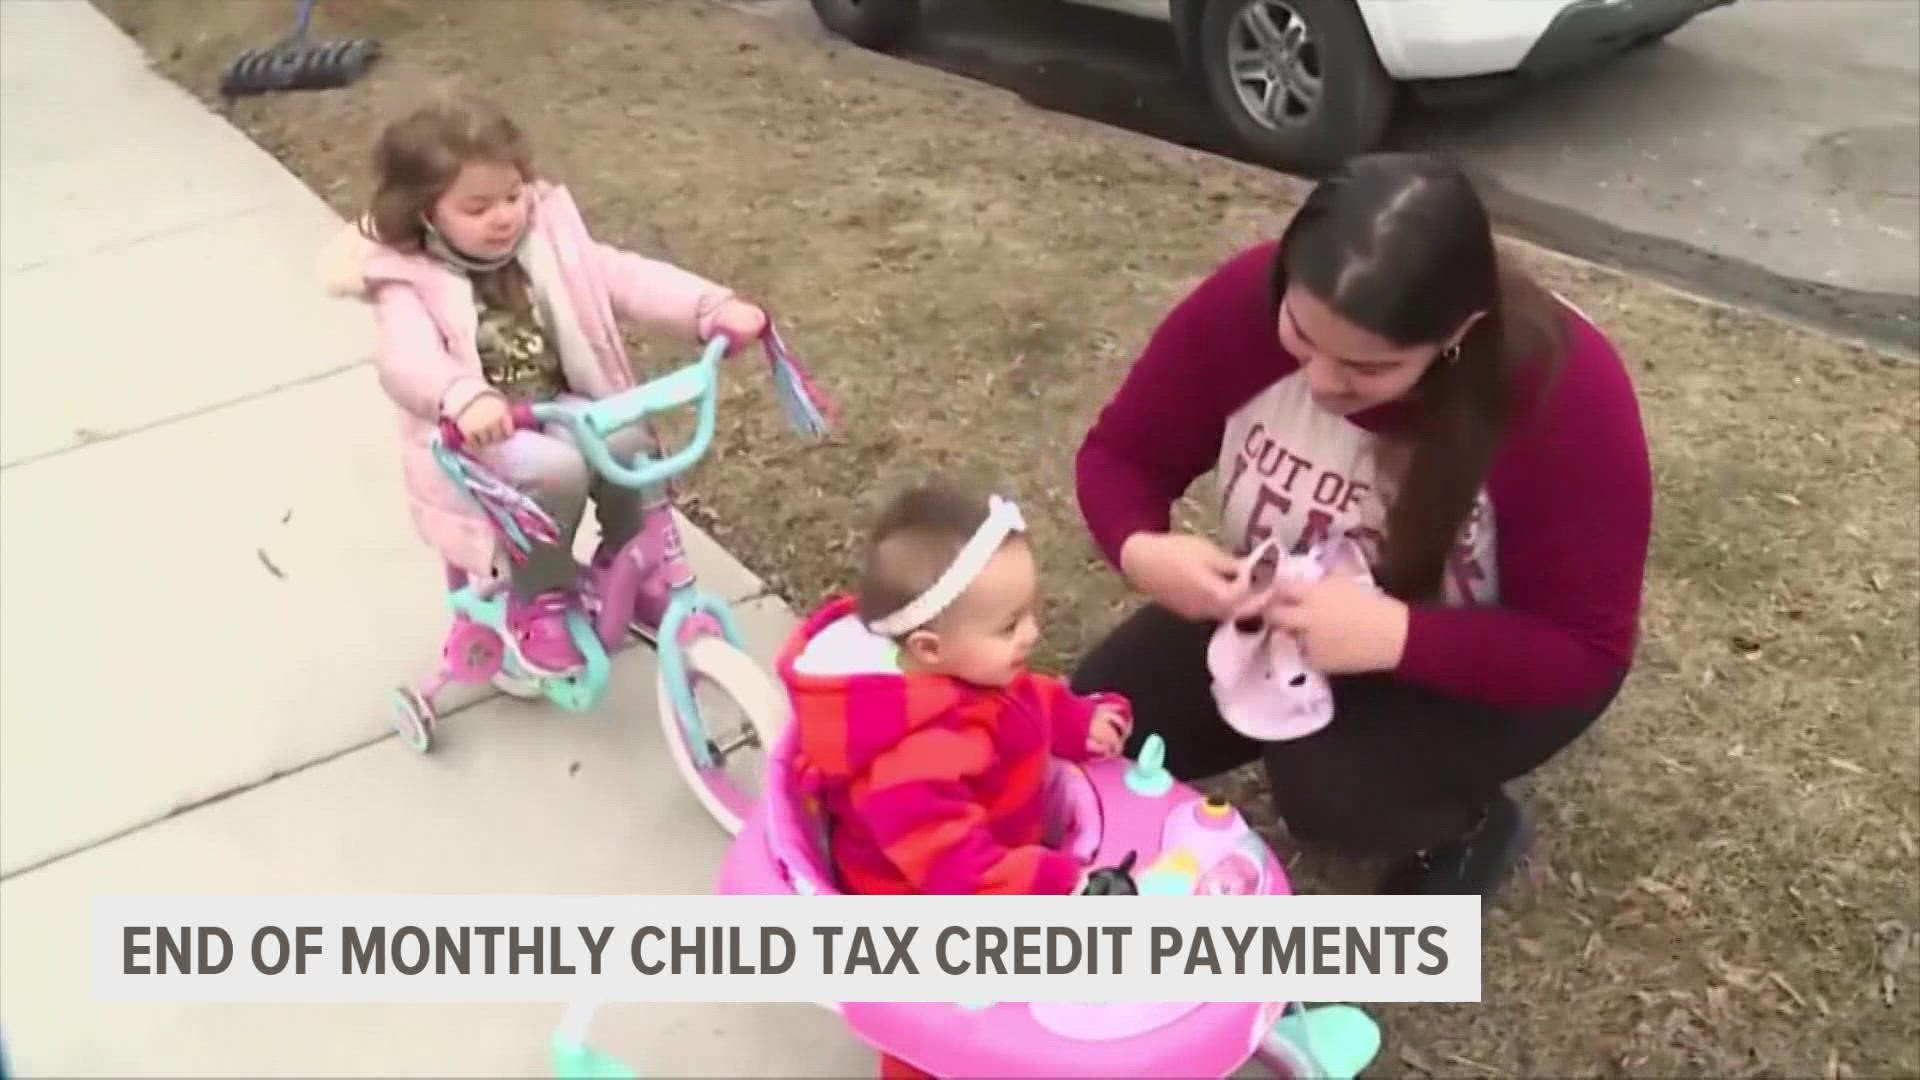 More than 36 million families received the monthly  child tax credit payment in December.